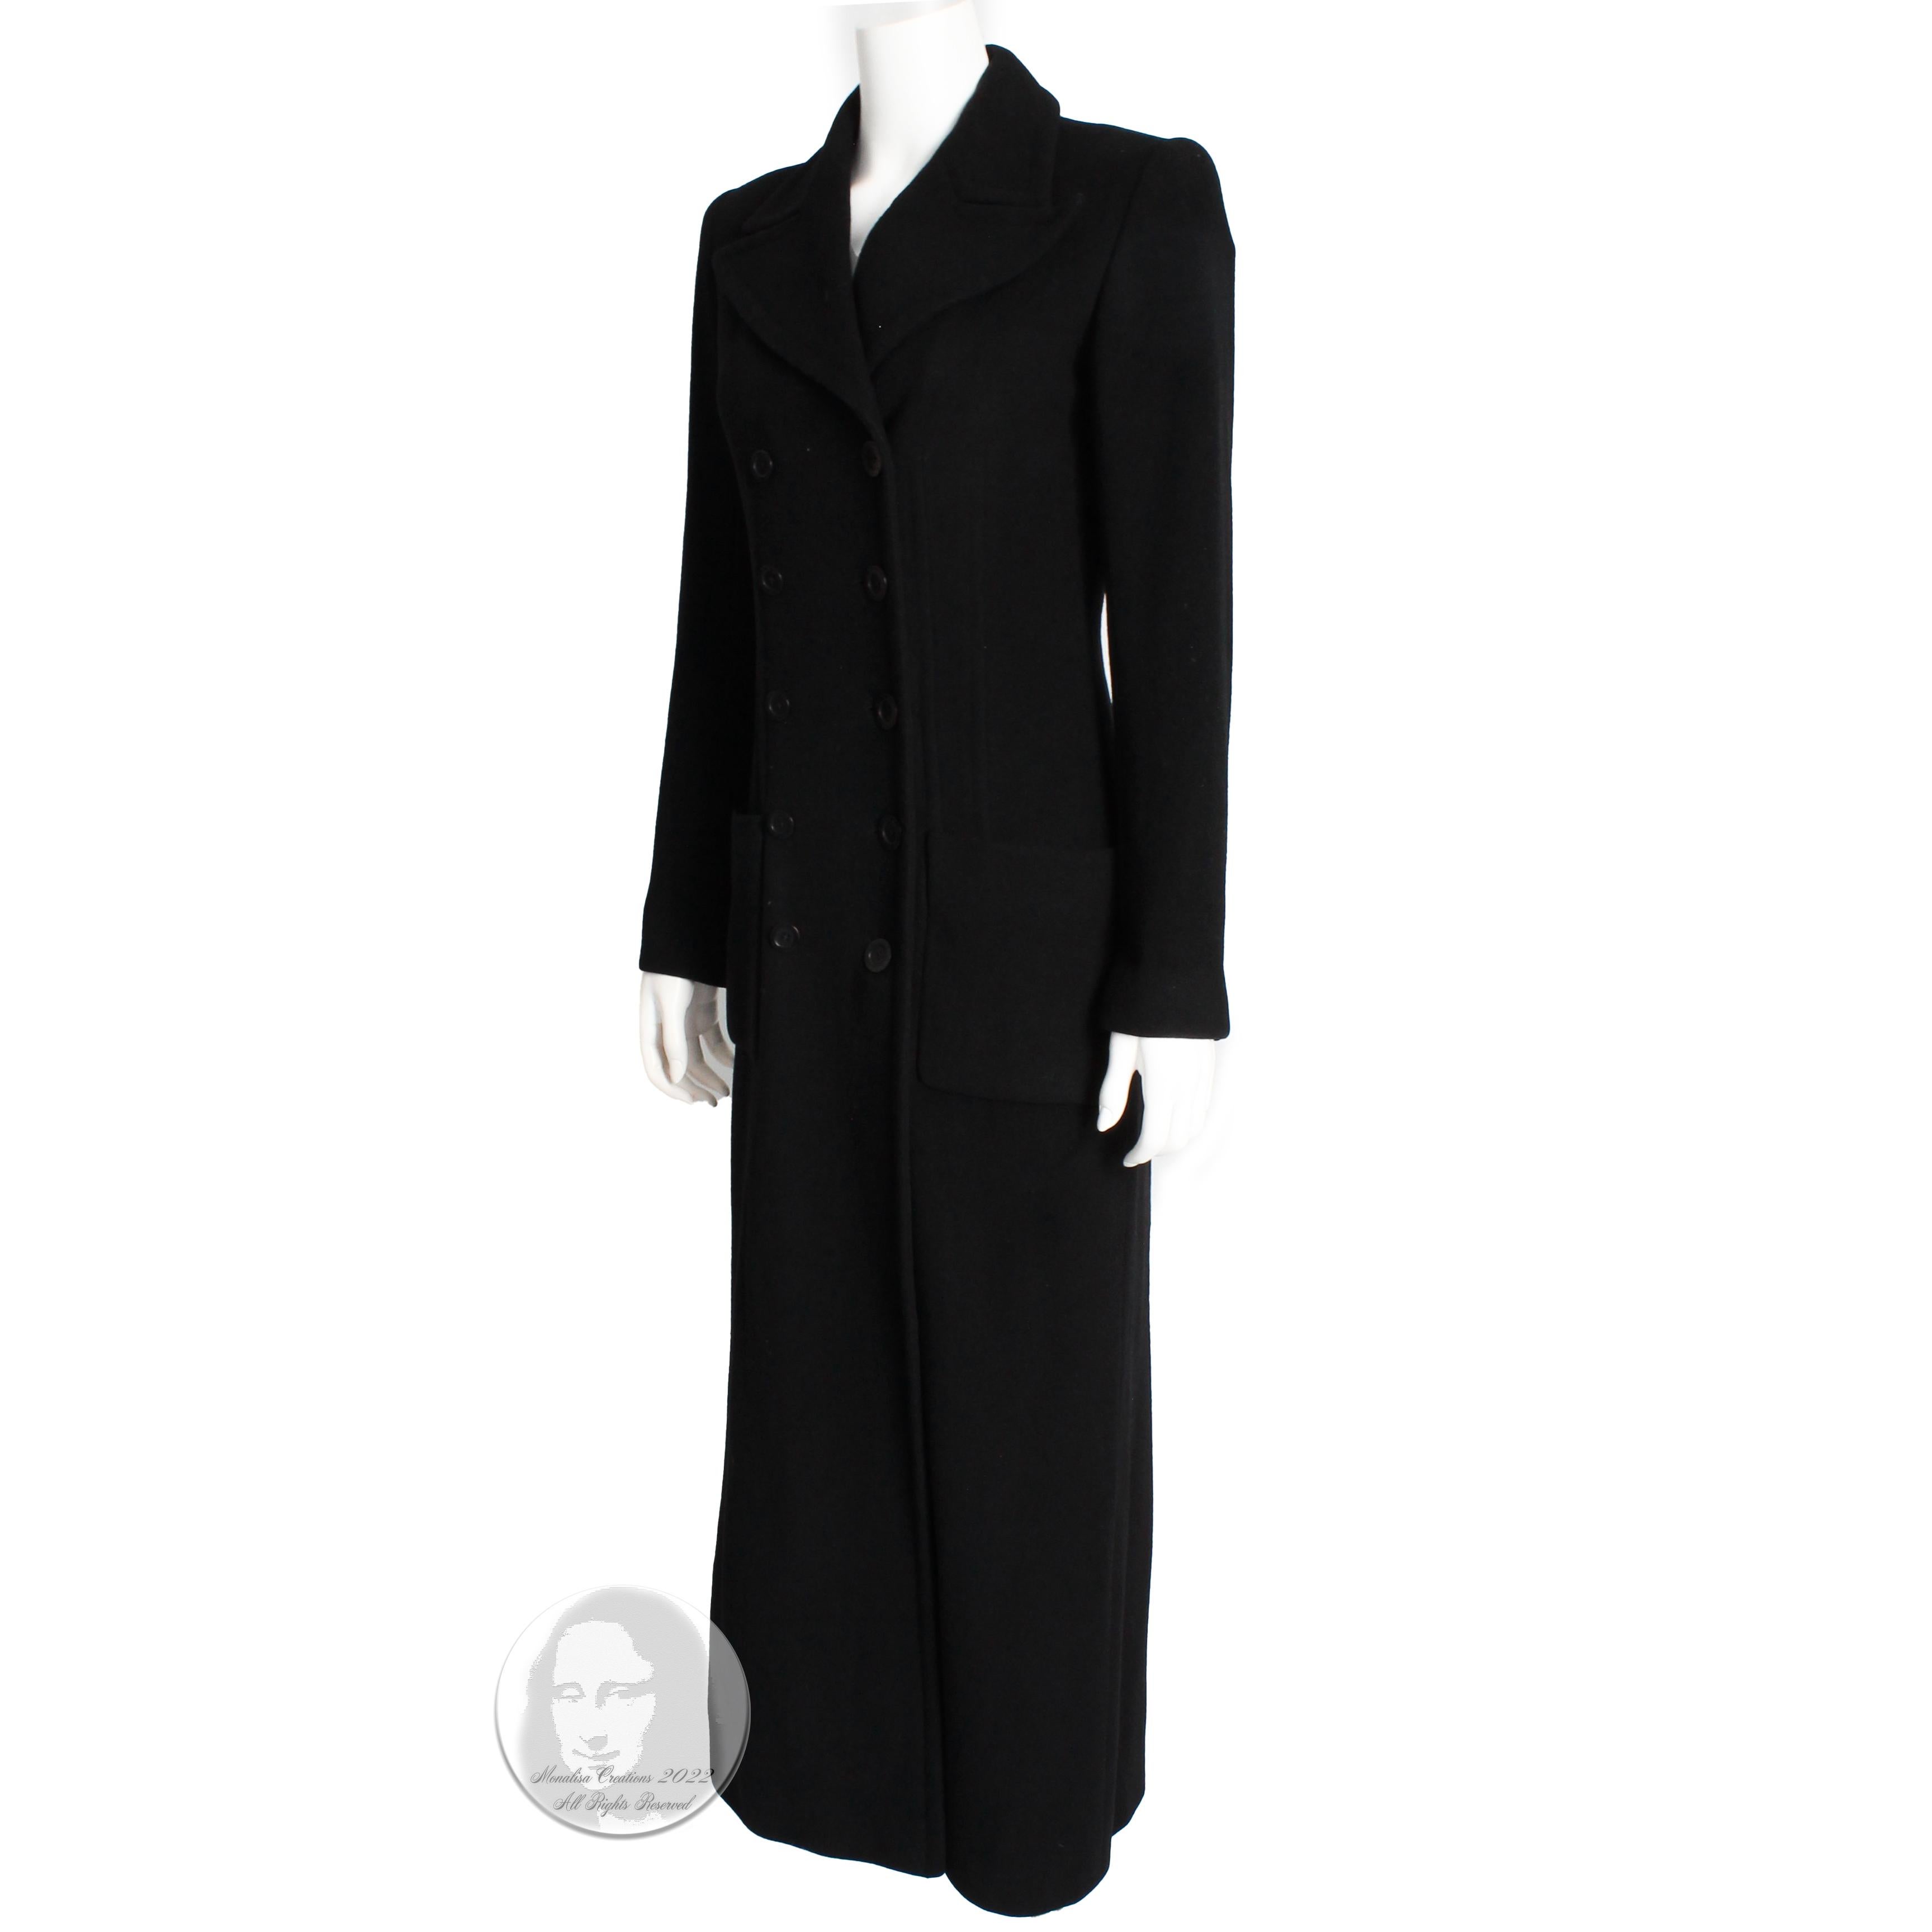 Women's Sonia Rykiel Cashmere Coat Black Double Breasted Long Trench Style Sz 38 Vintage